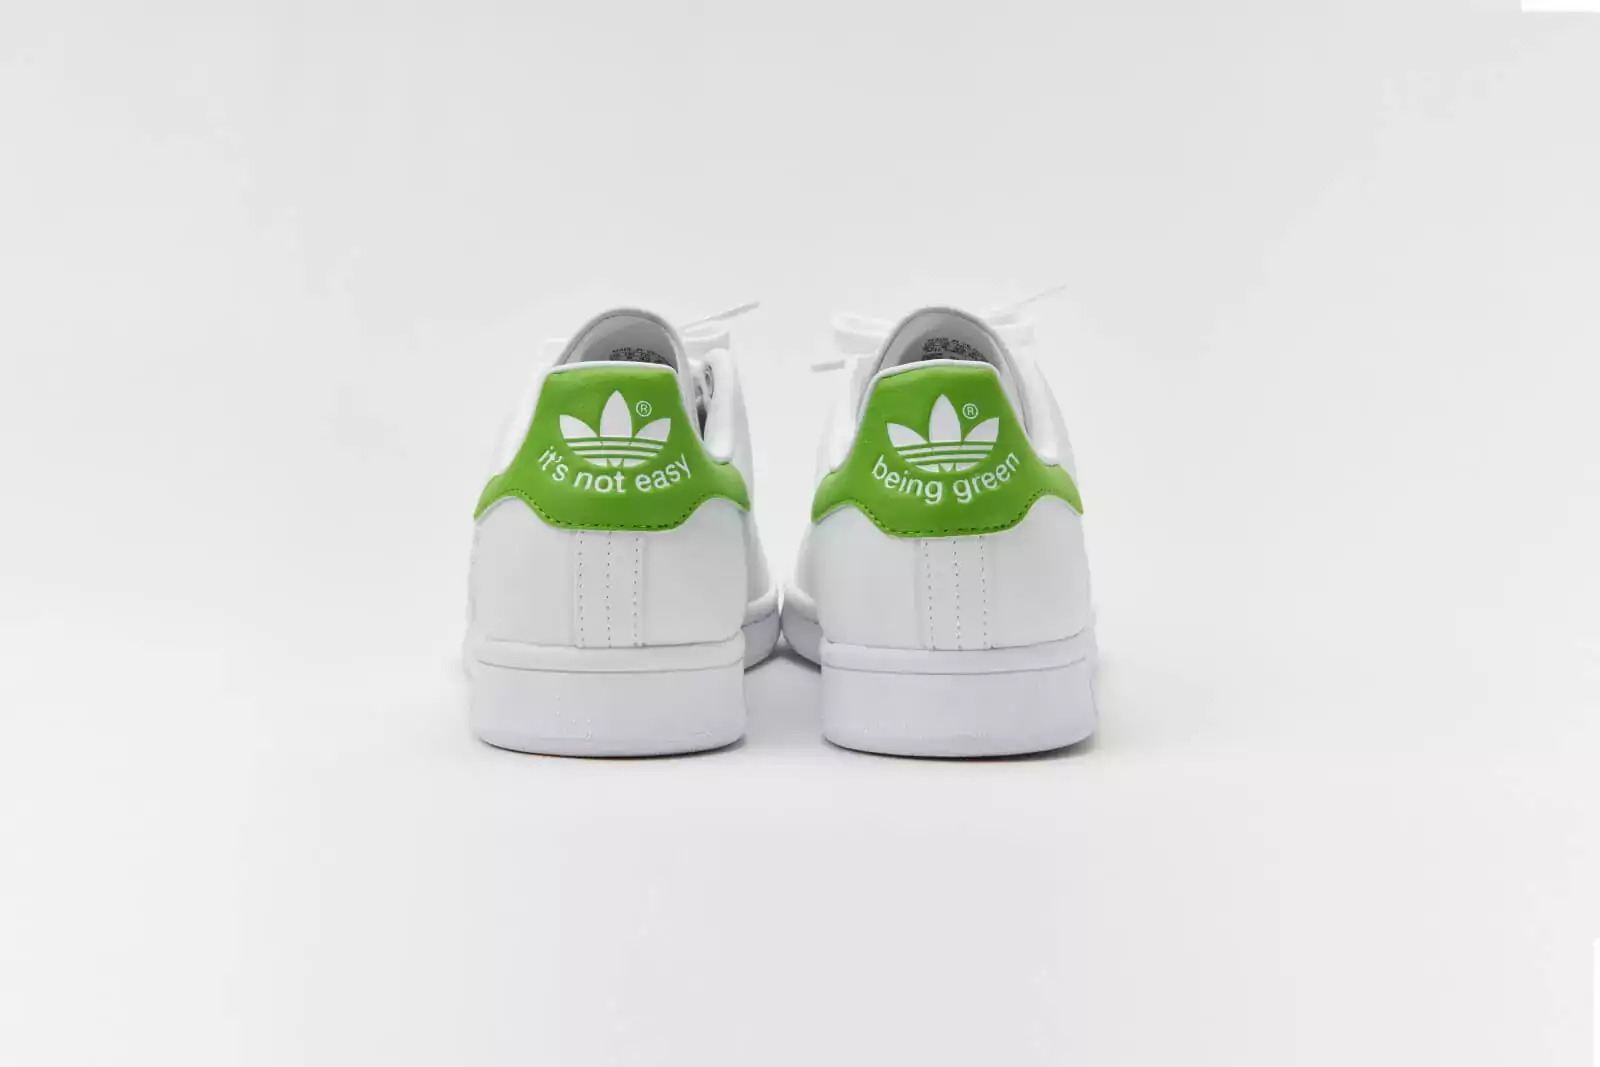 Why is Kermit the Frog so friendly with adidas Stan Smith